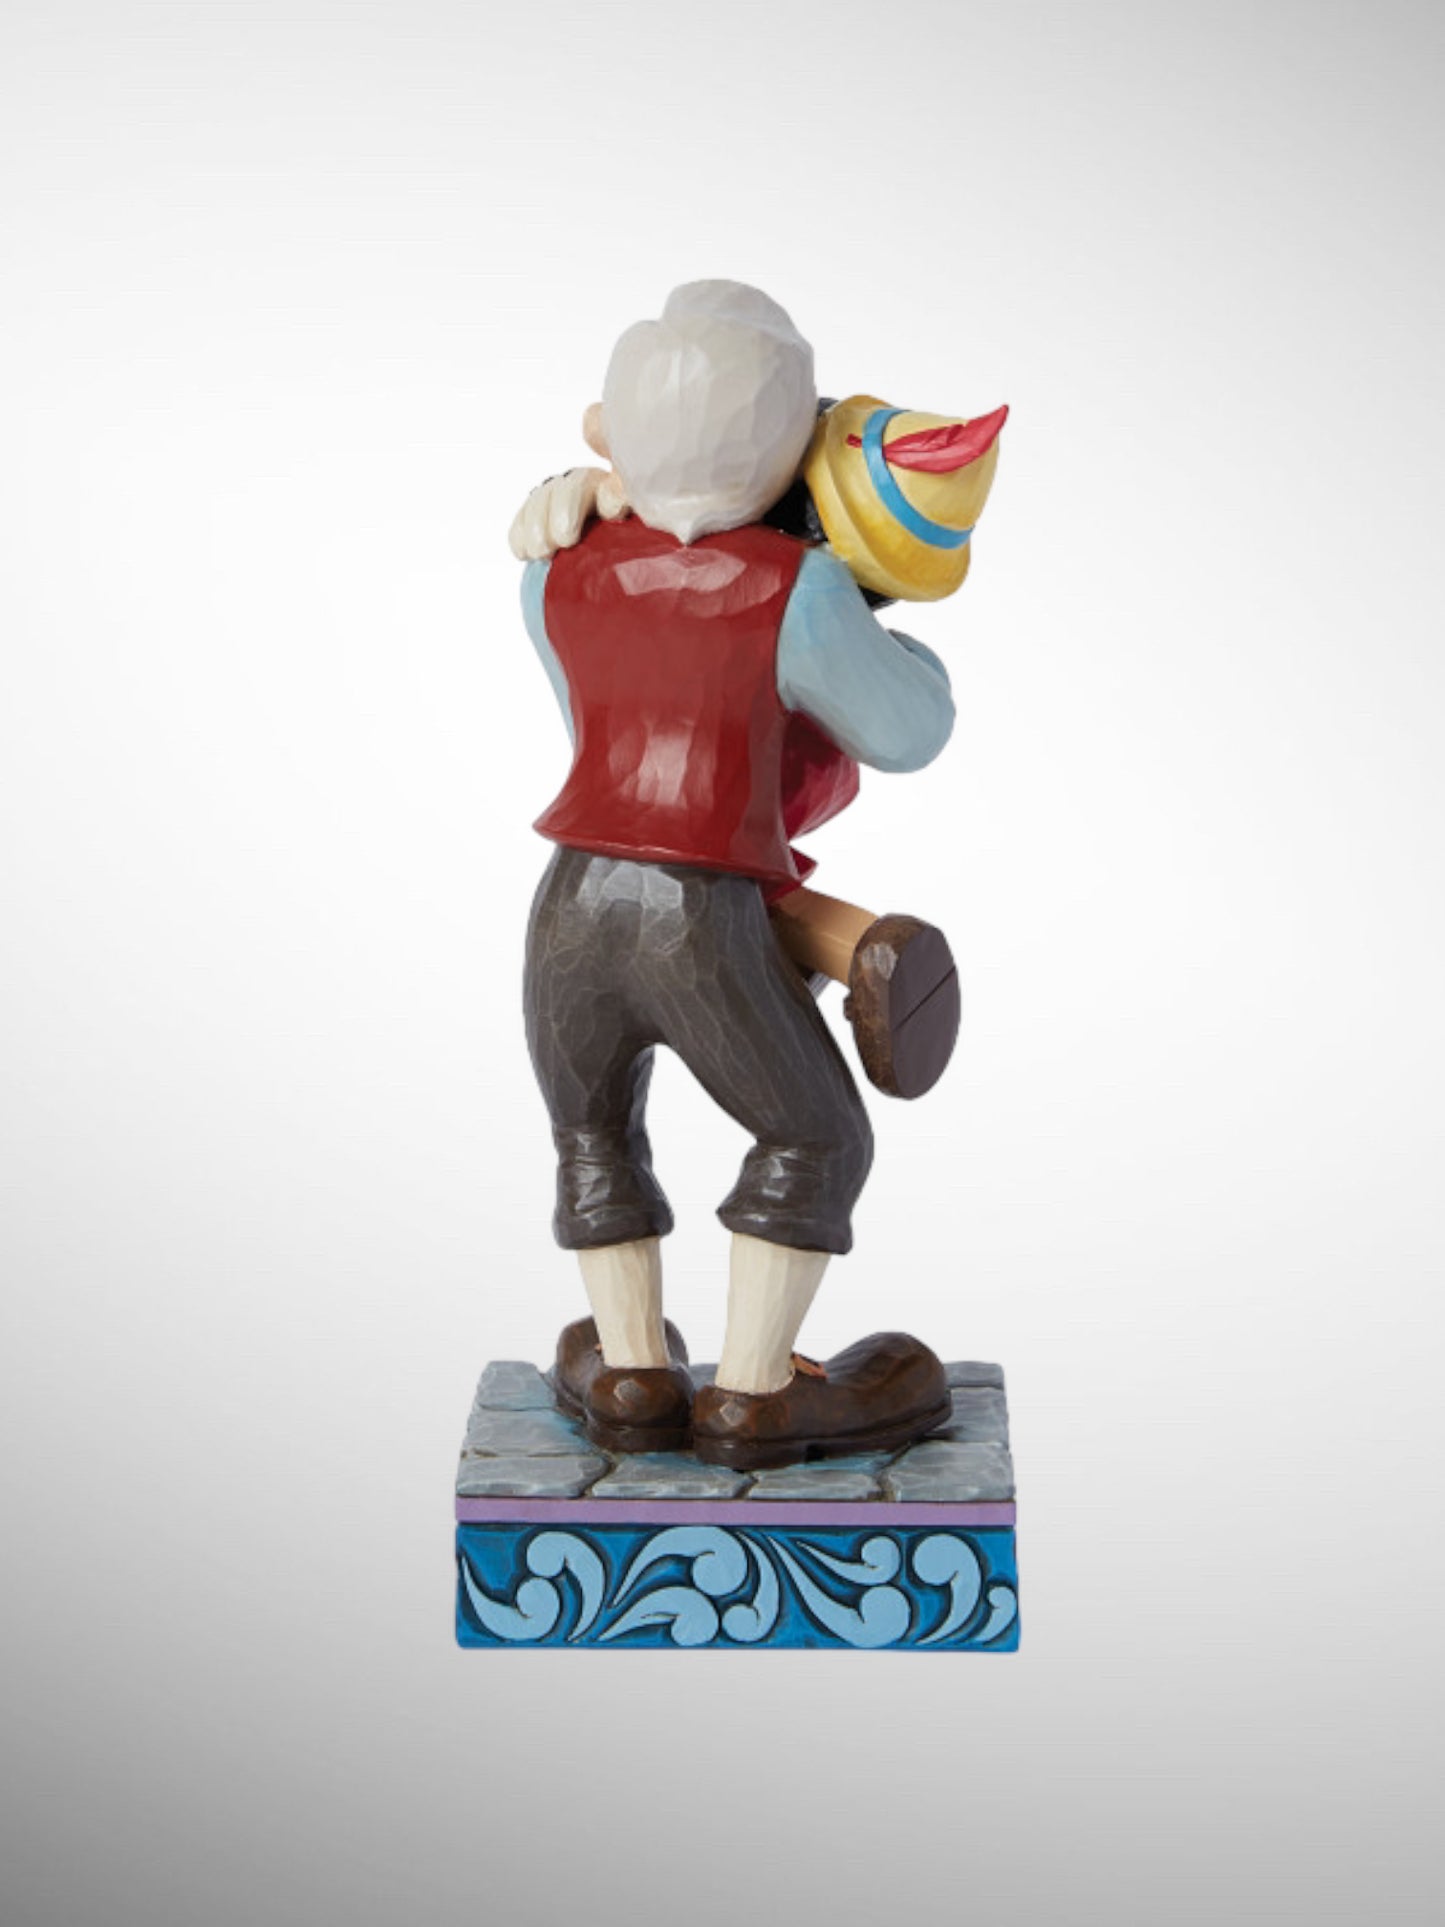 Jim Shore Disney Traditions - A Father's Love Gepetto and Pinocchio Figurine - PREORDER